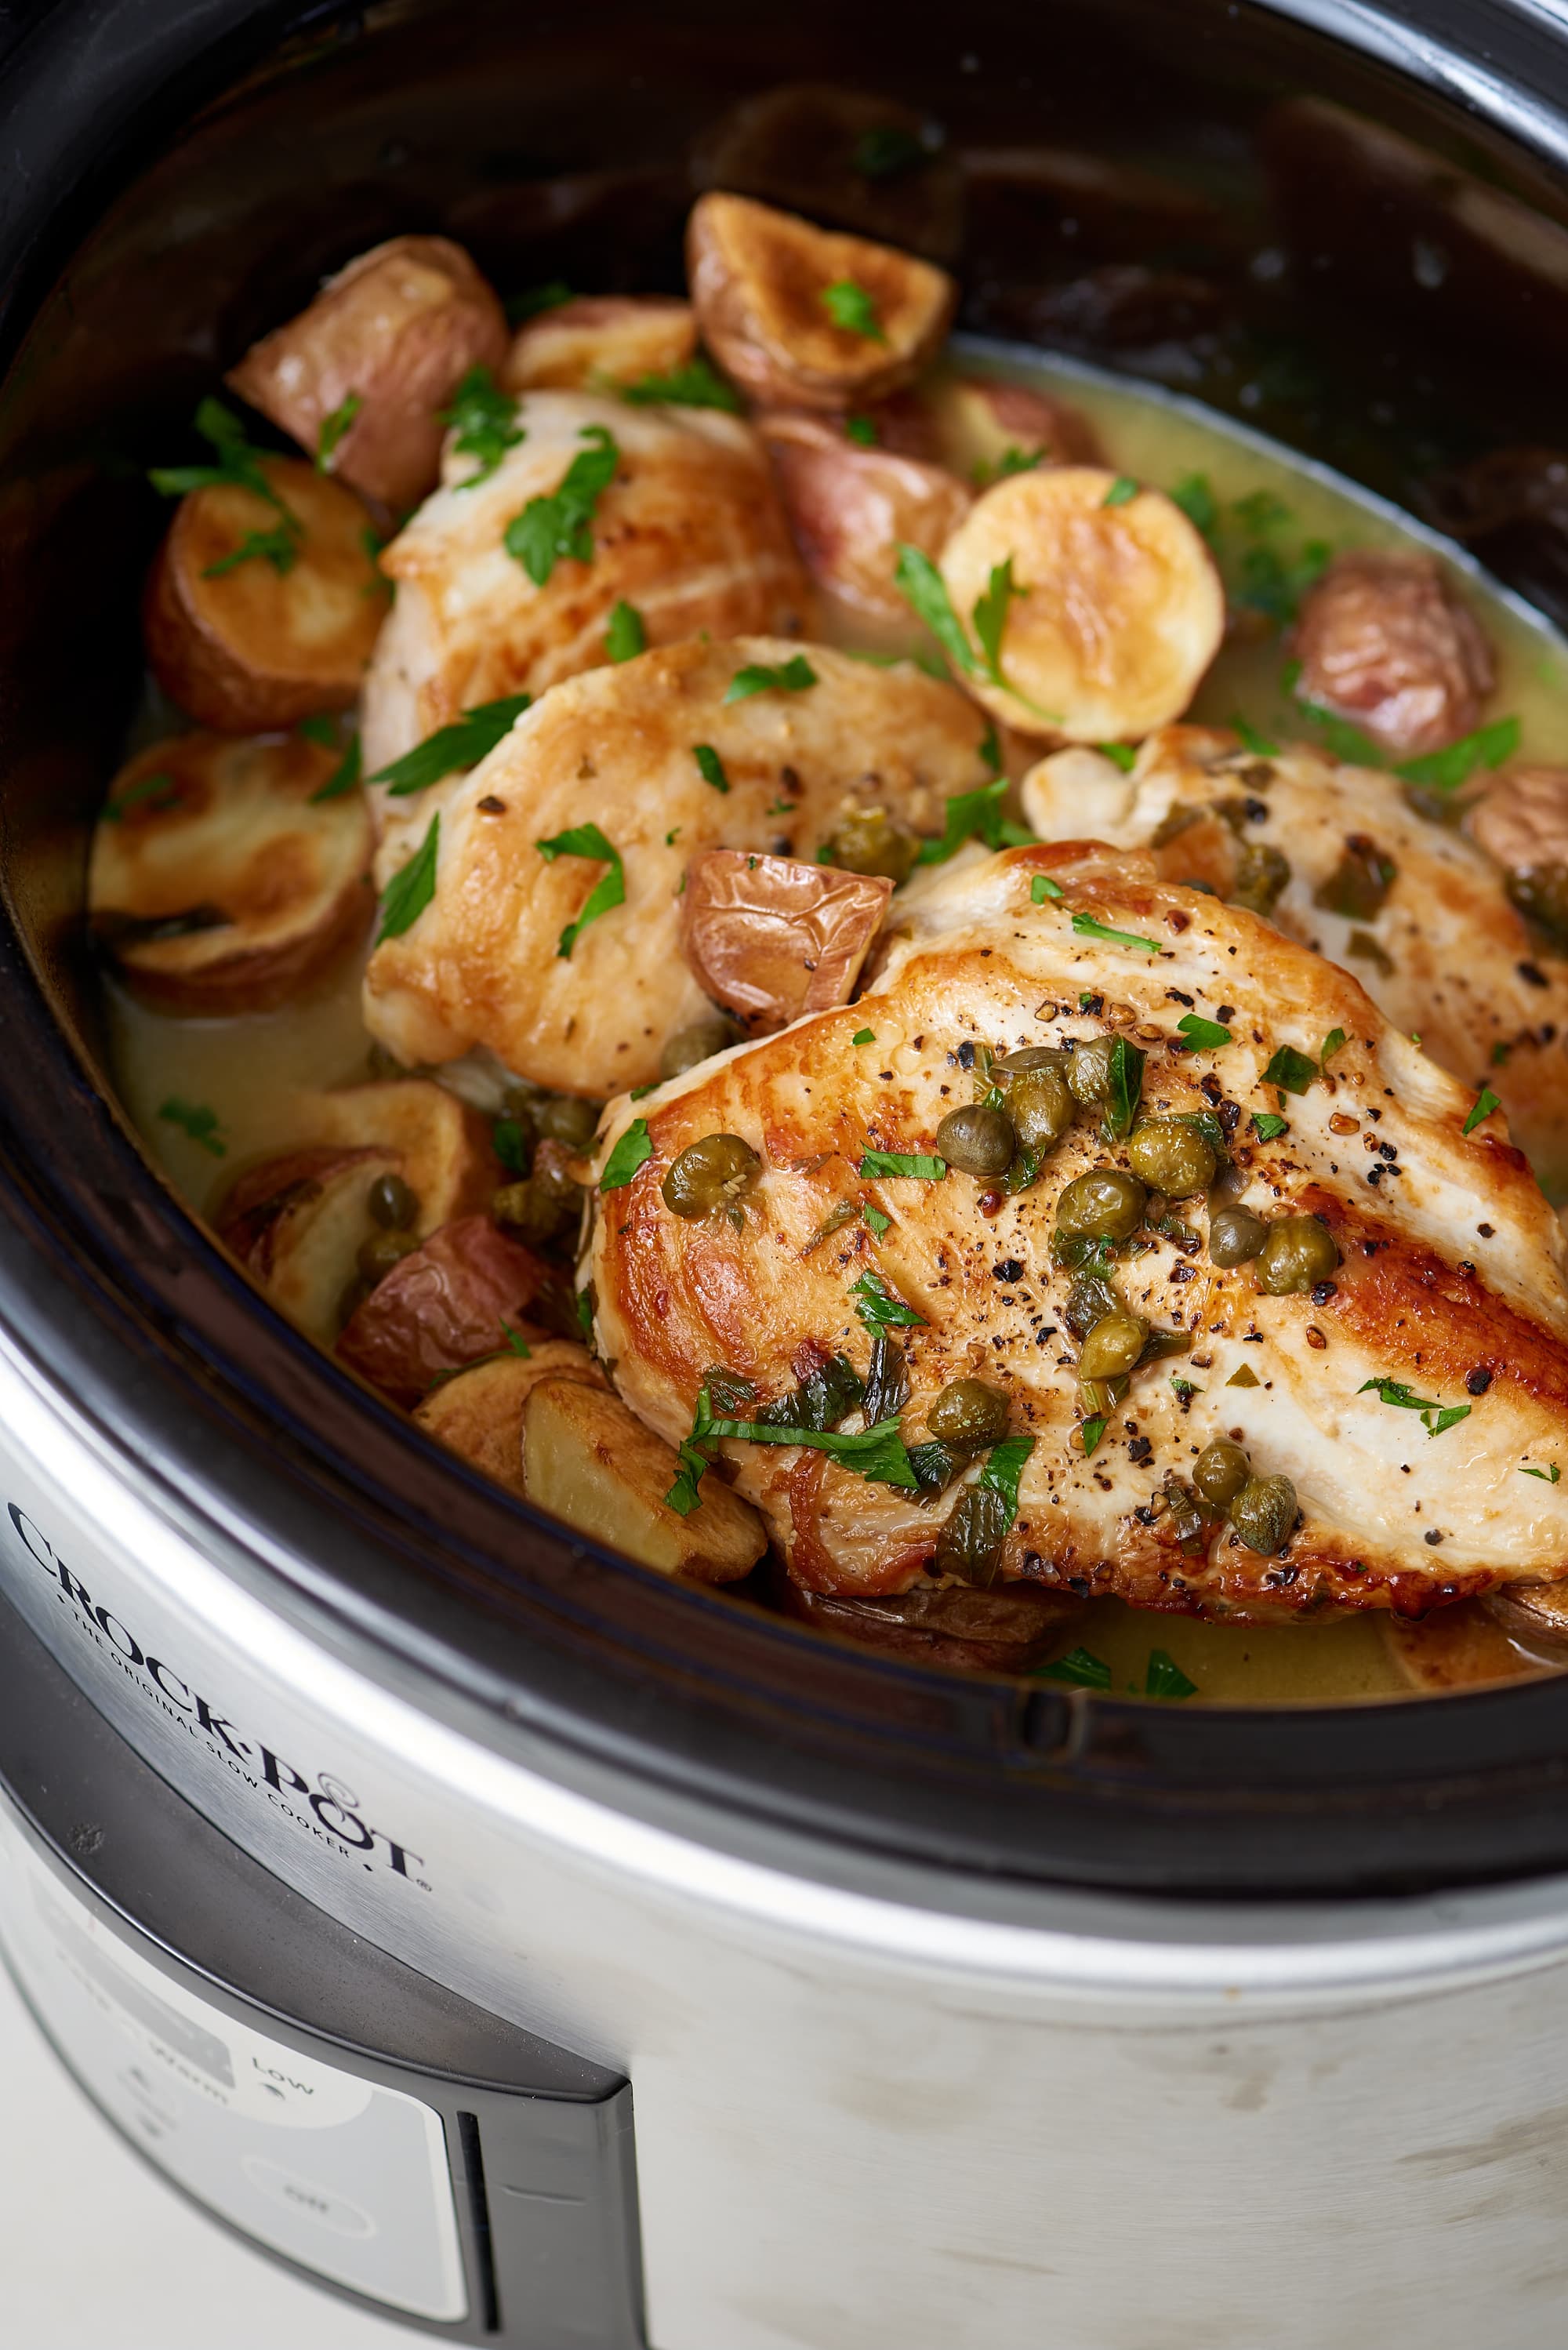 Best mini slow cooker: Top 5 picks for this moment 